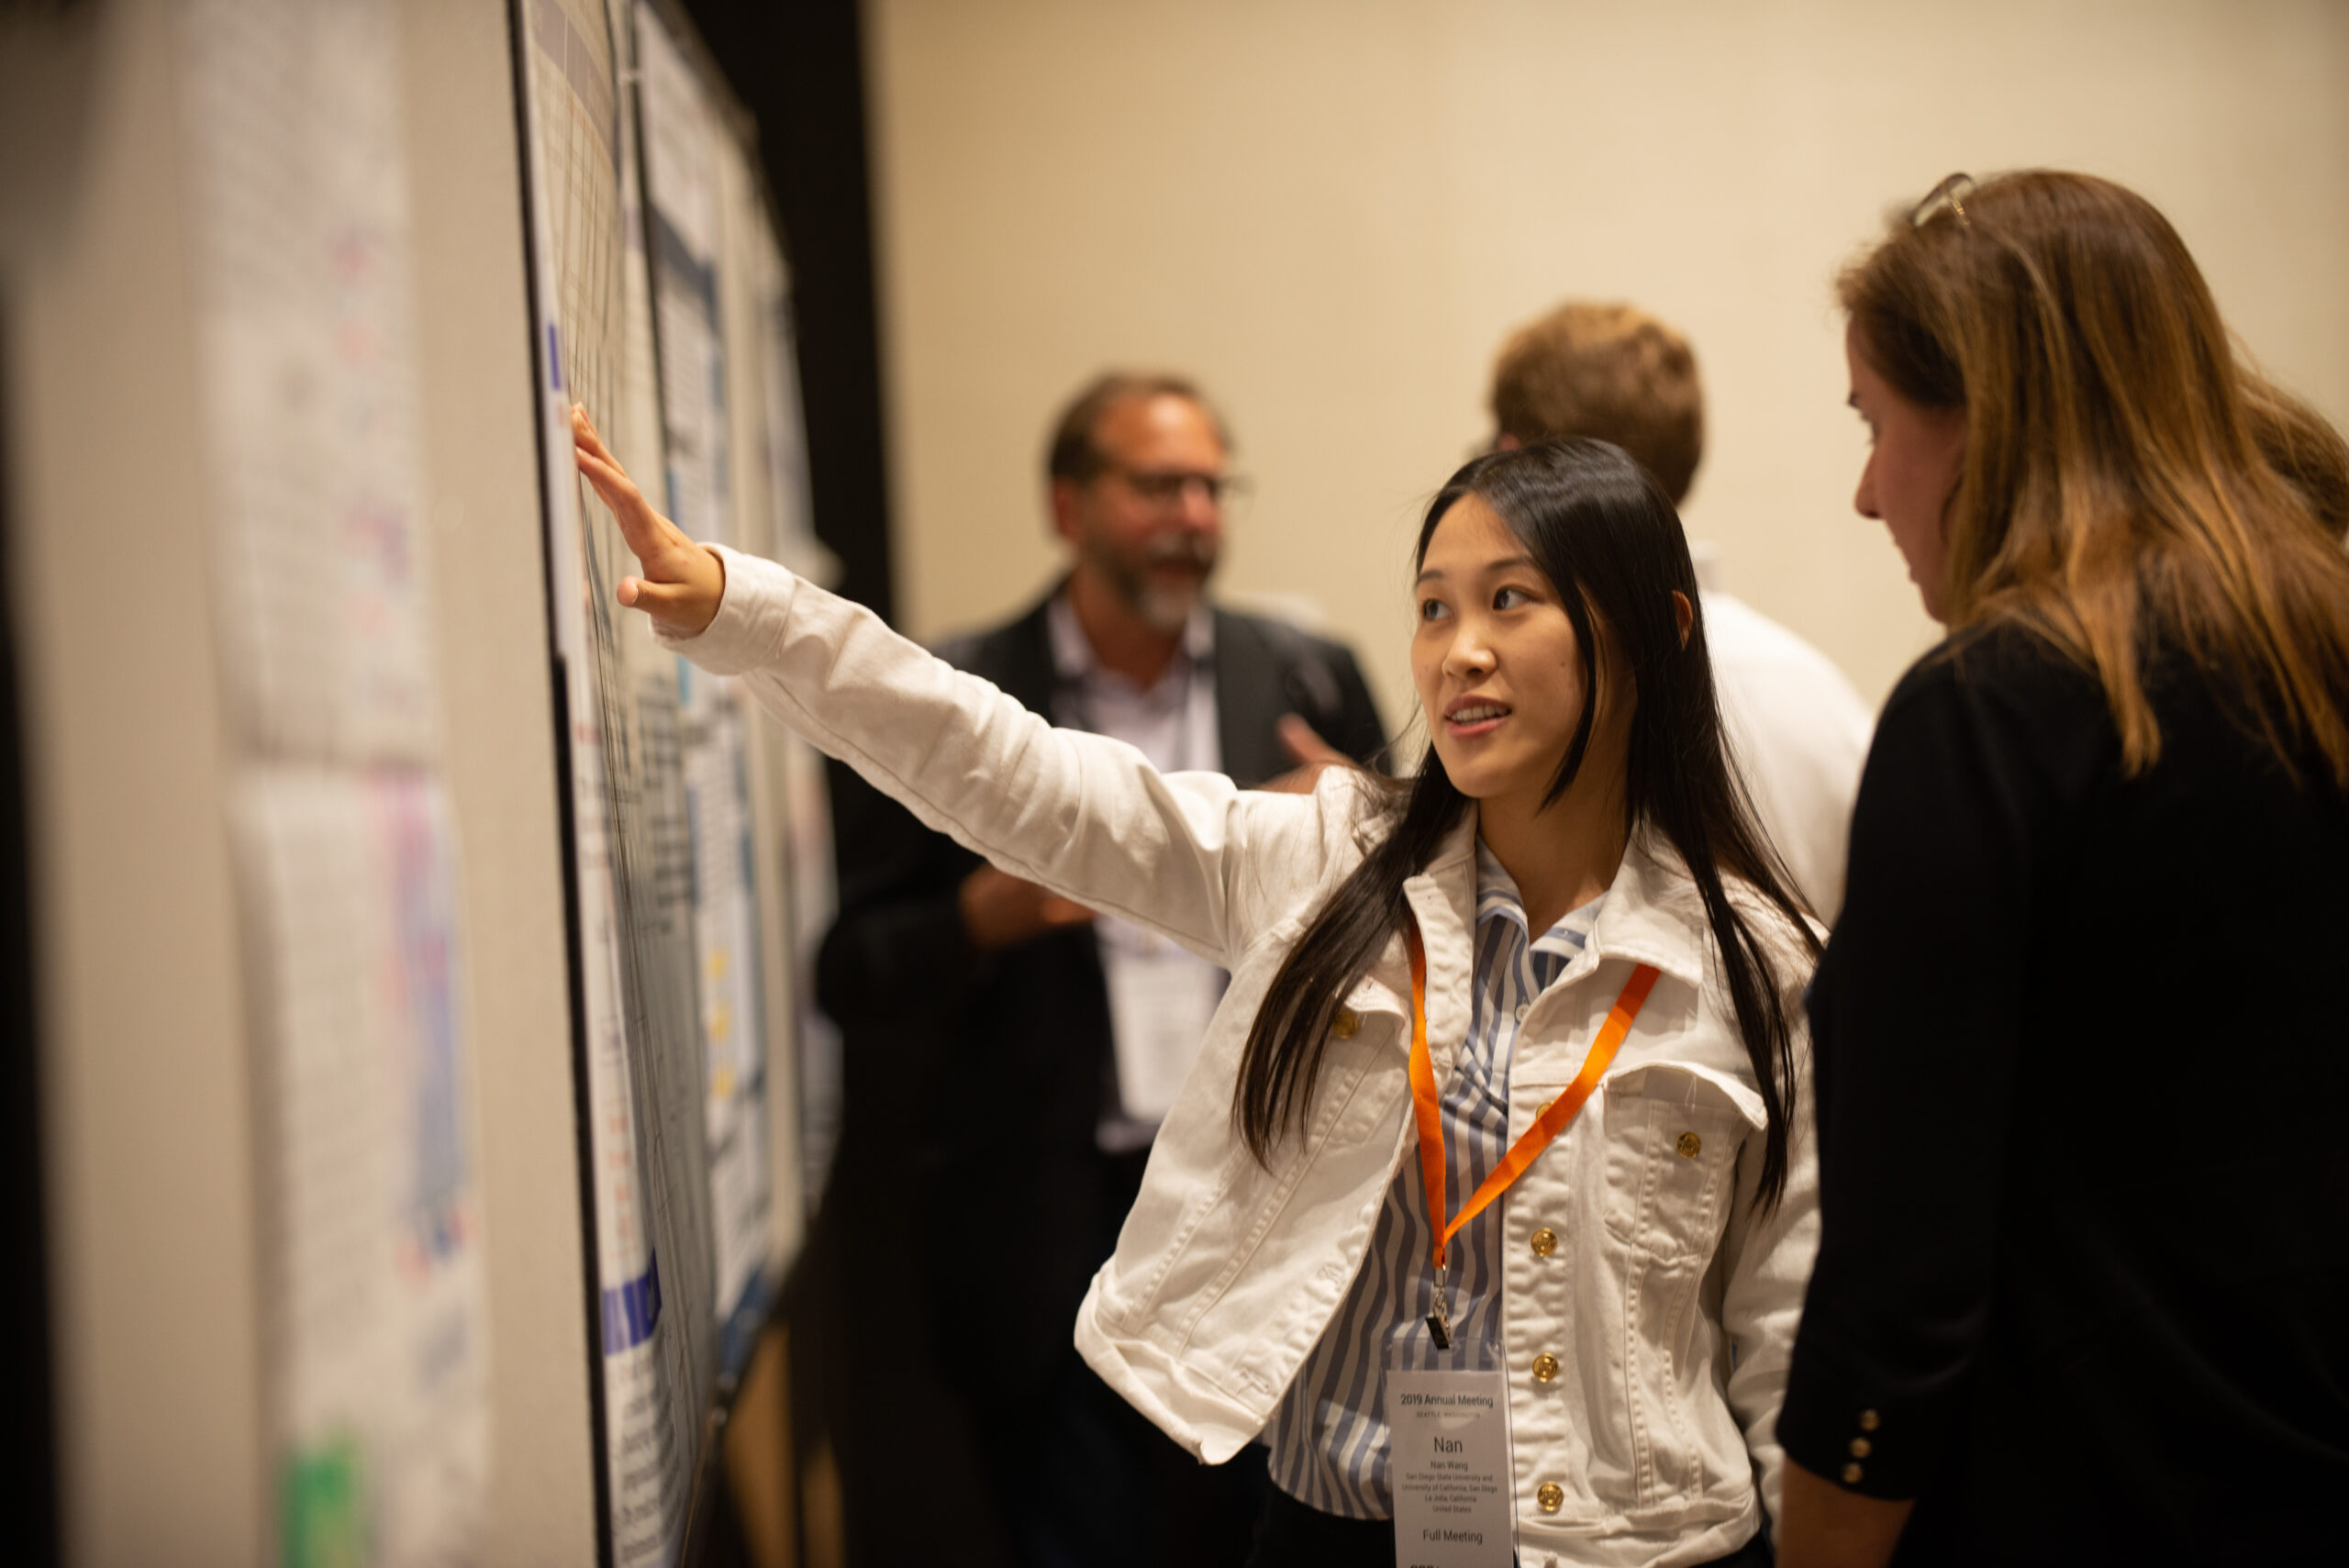 A presenter explains a poster to an attendee at the Annual Meeting 2023